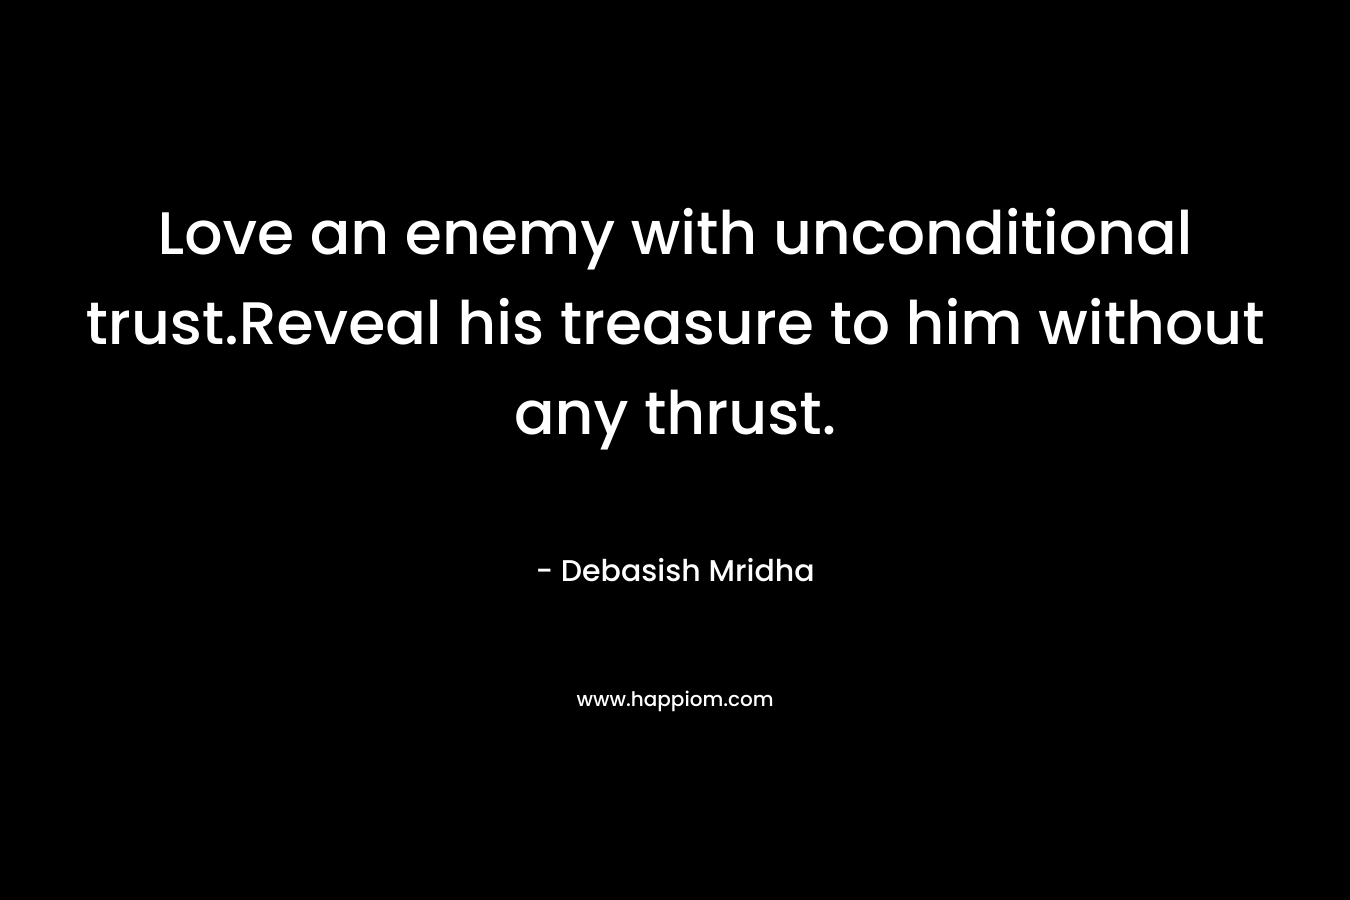 Love an enemy with unconditional trust.Reveal his treasure to him without any thrust.